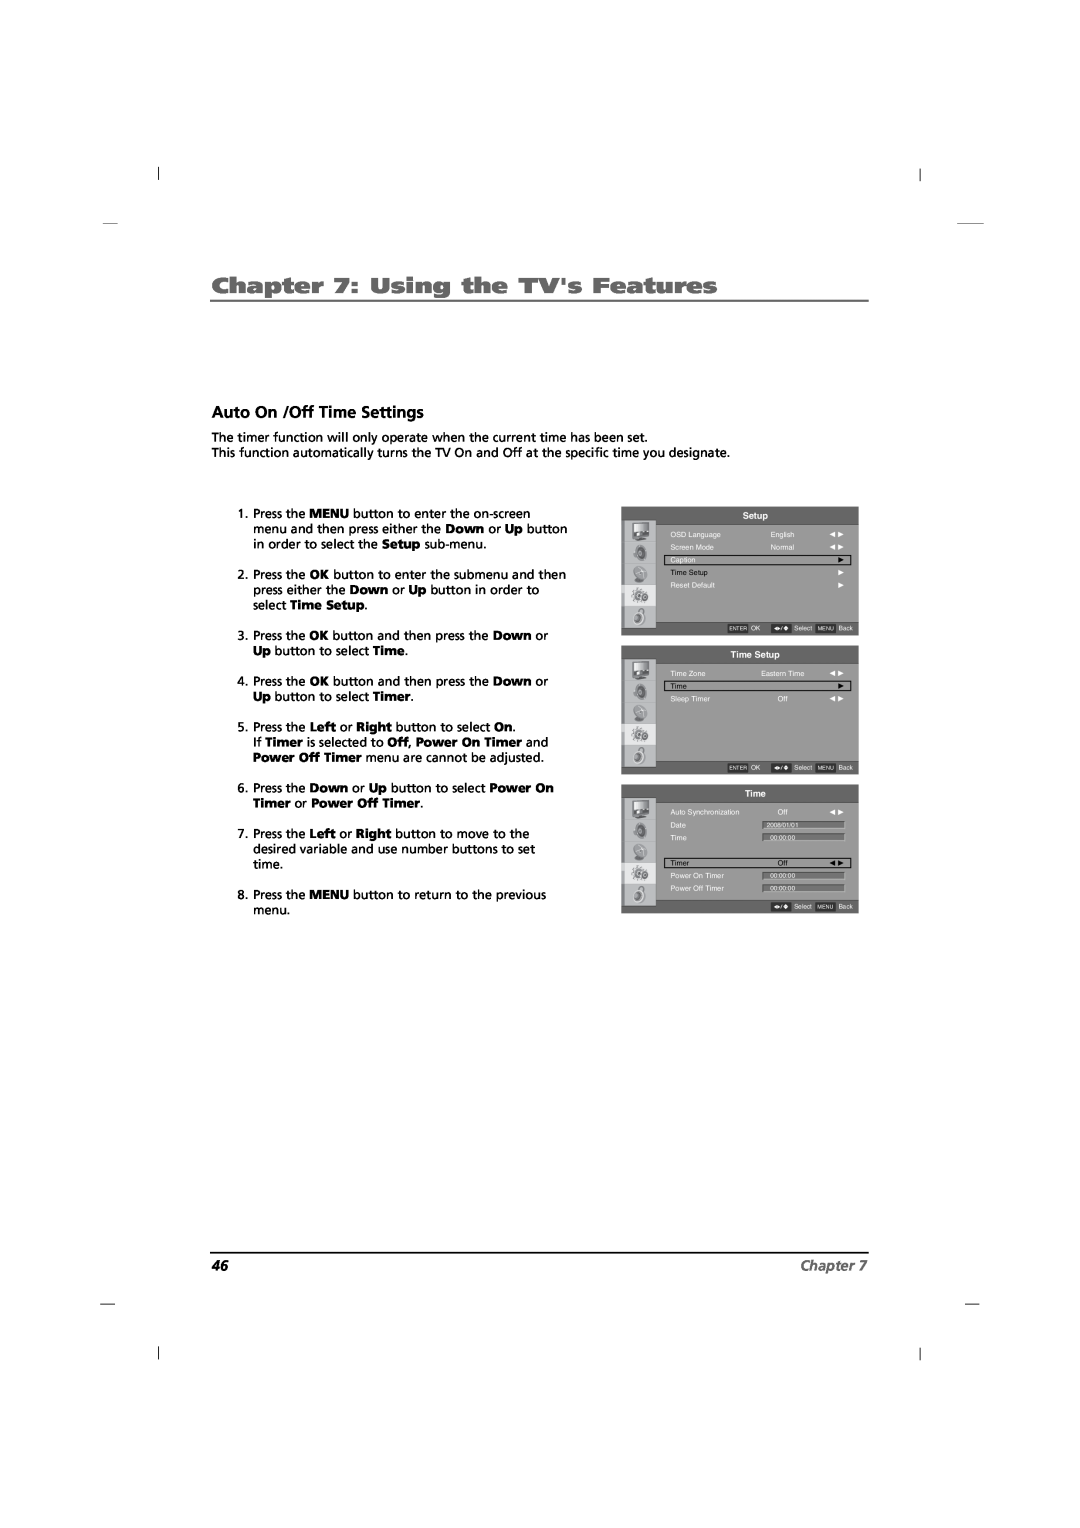 RCA J12H770 manual Auto On /Off Time Settings, Using the TVs Features, Chapter 